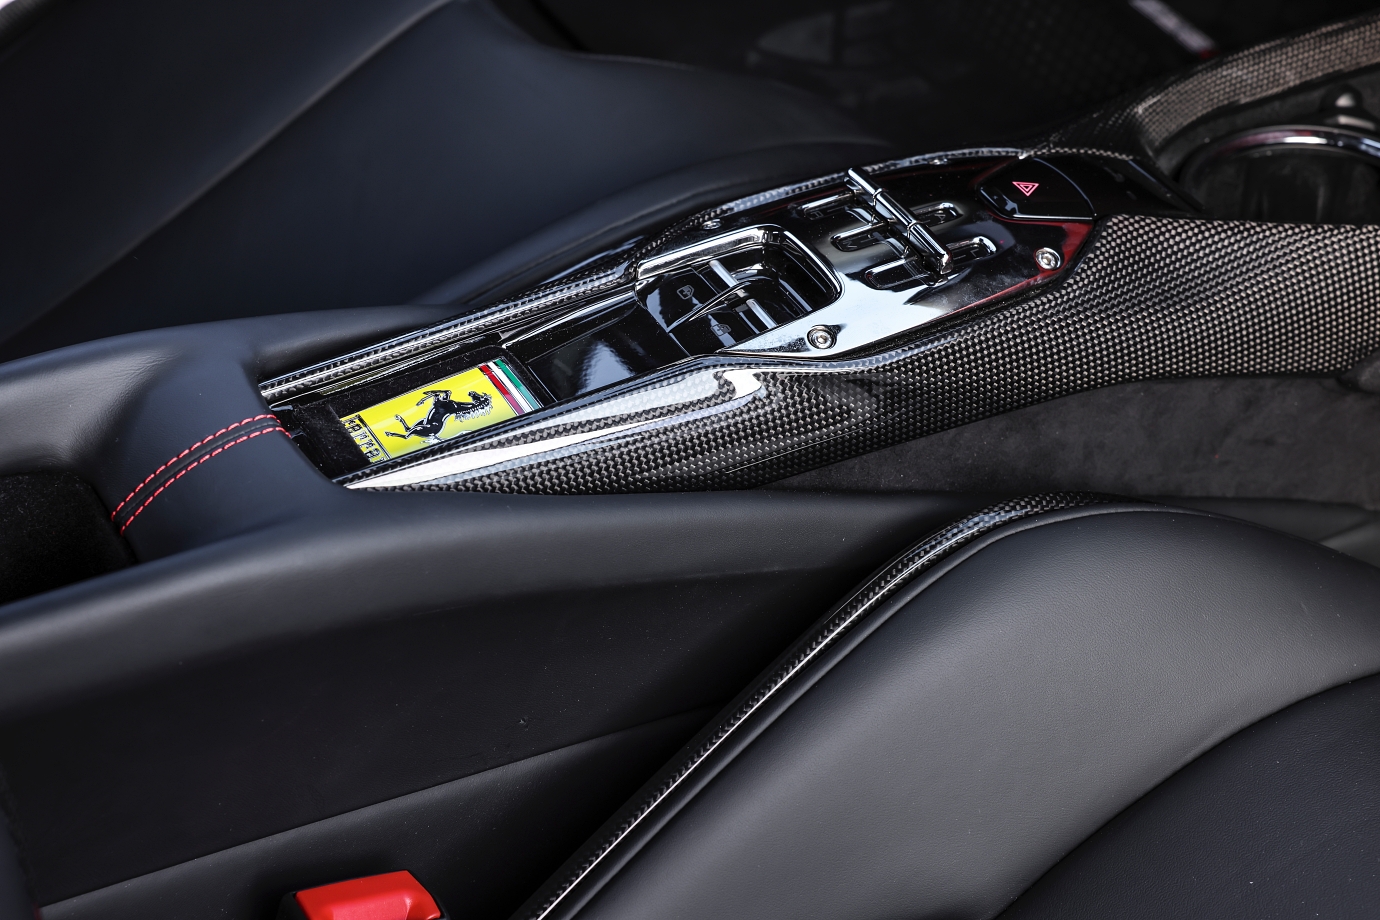 Transmission selector is intended to echo the signature open-gate shifters of manual Ferraris